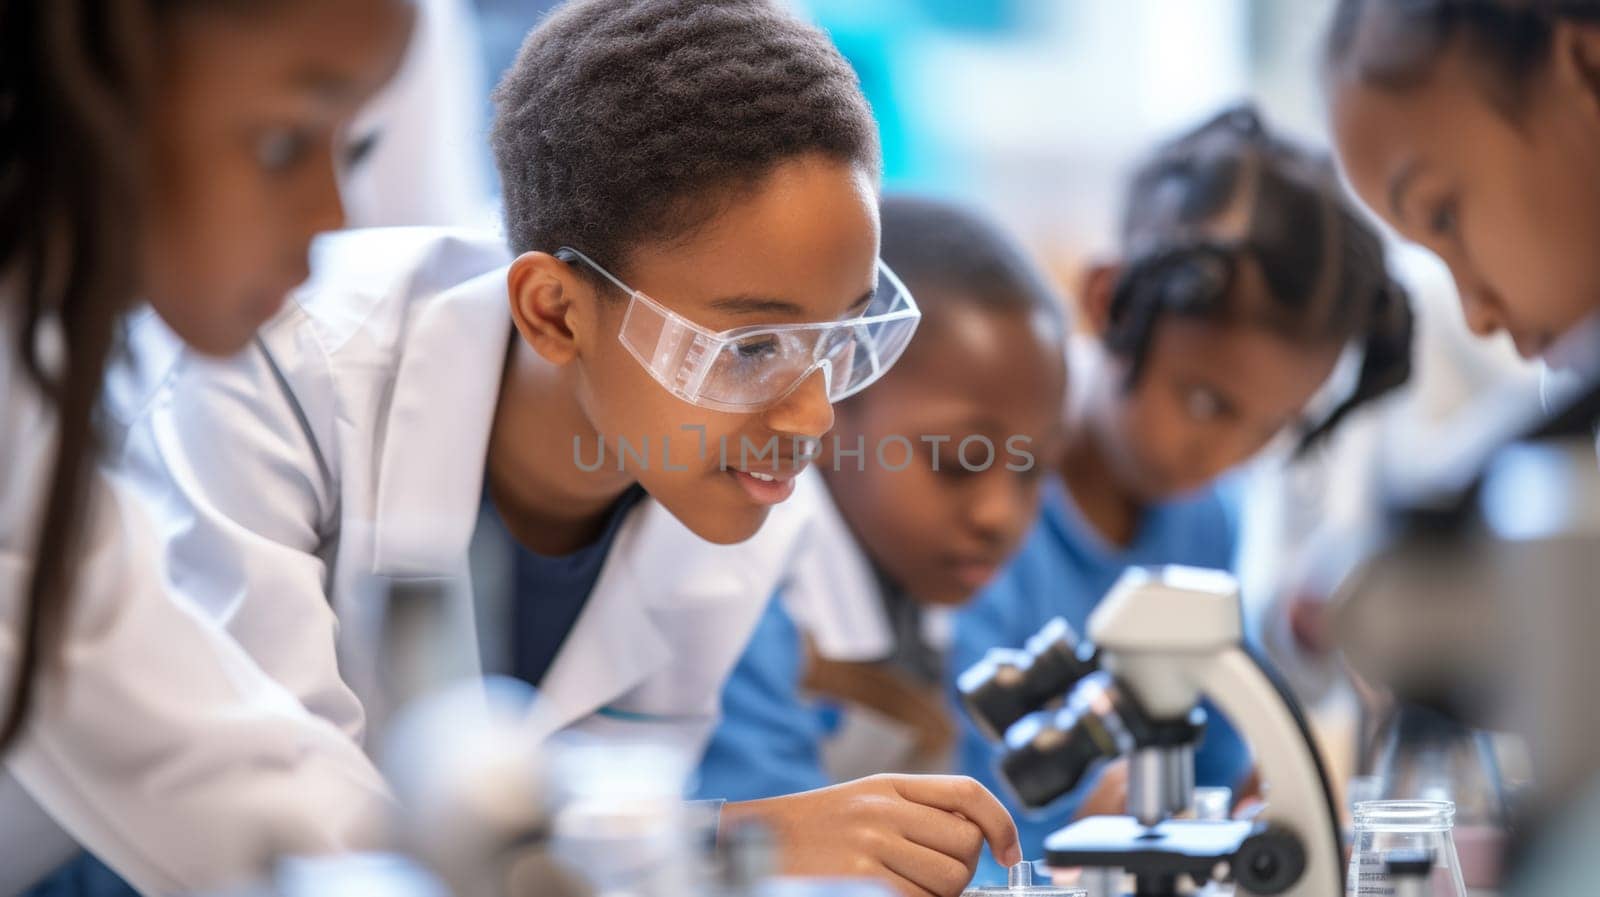 A group of children in lab coats looking at a microscope